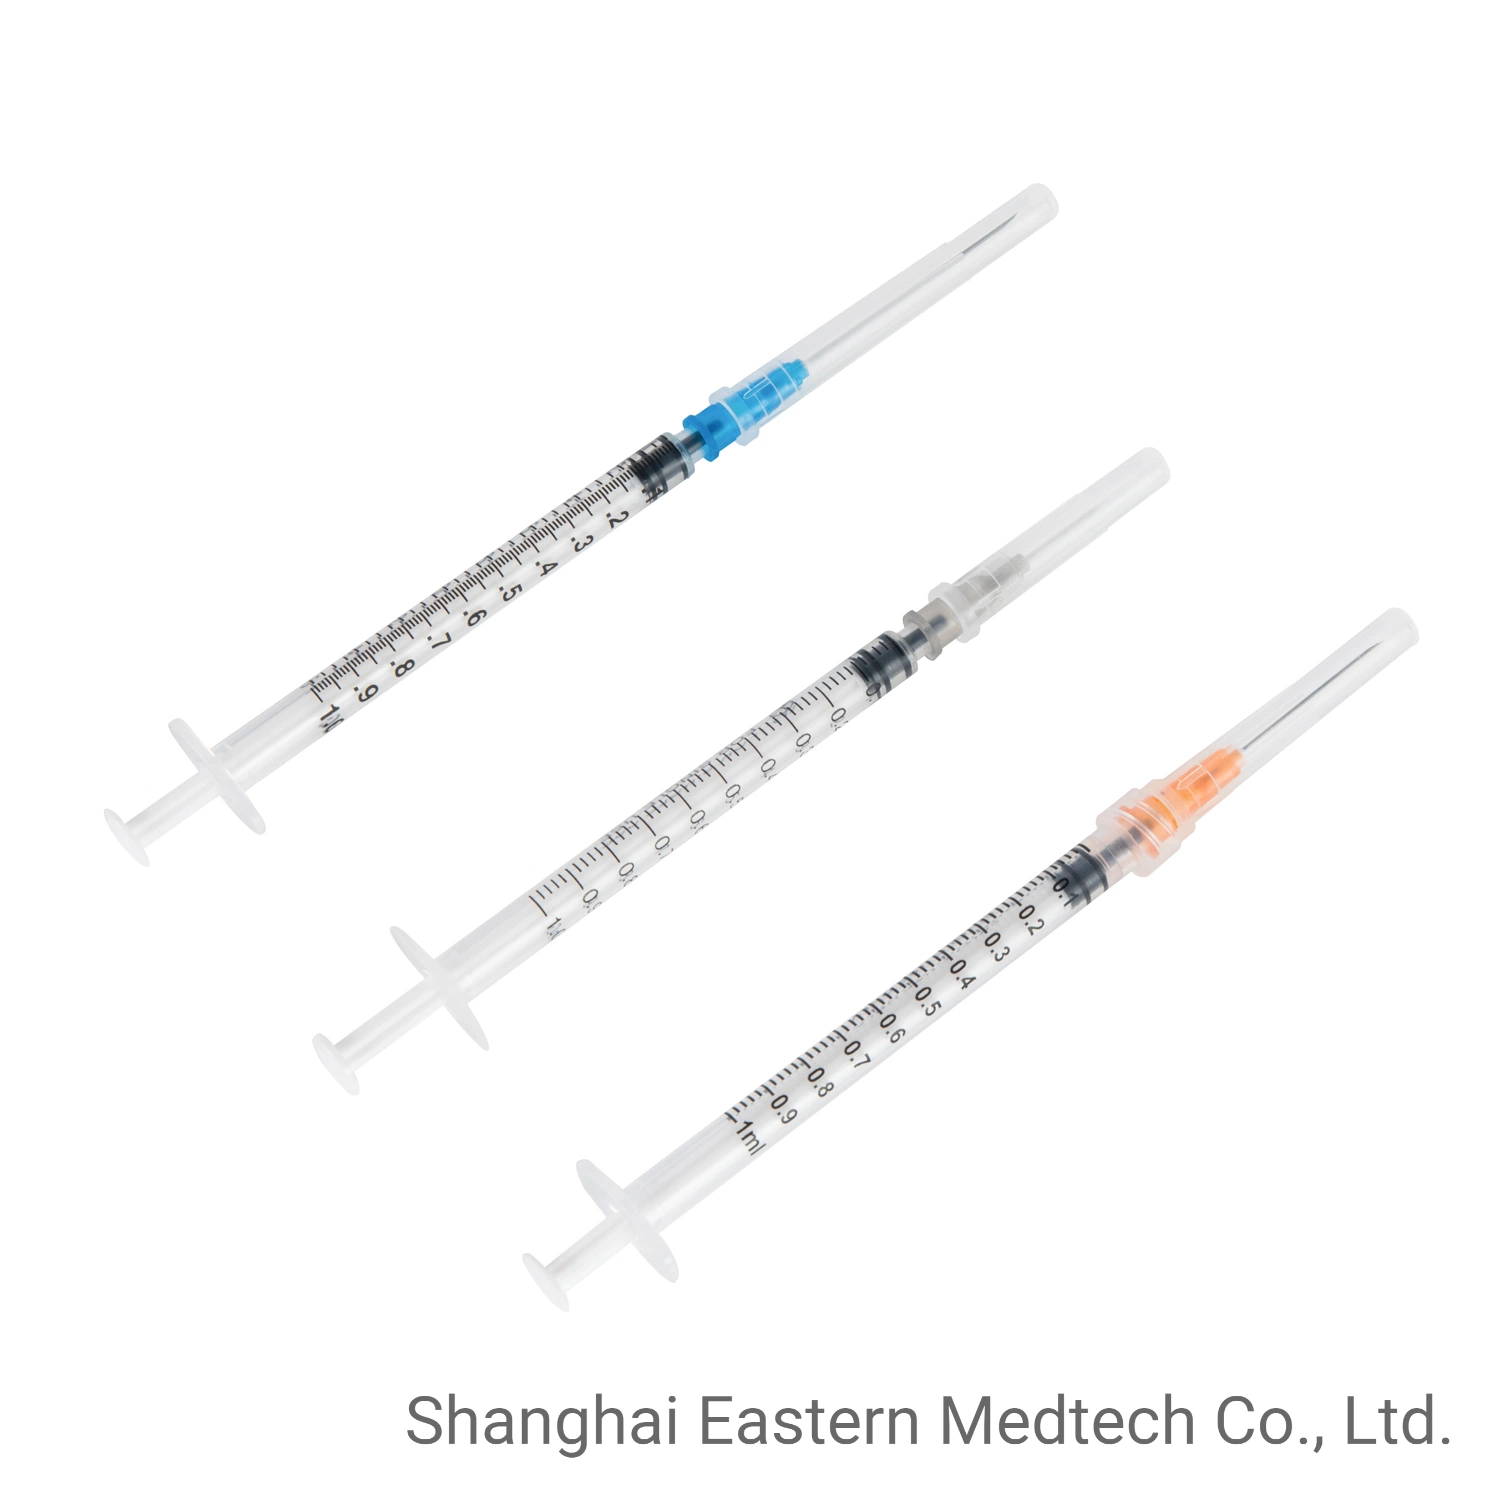 China Wholesale Medical Supply Classic 1ml 3-Part Disposable Sterile Syringe for Vaccine Injection Use